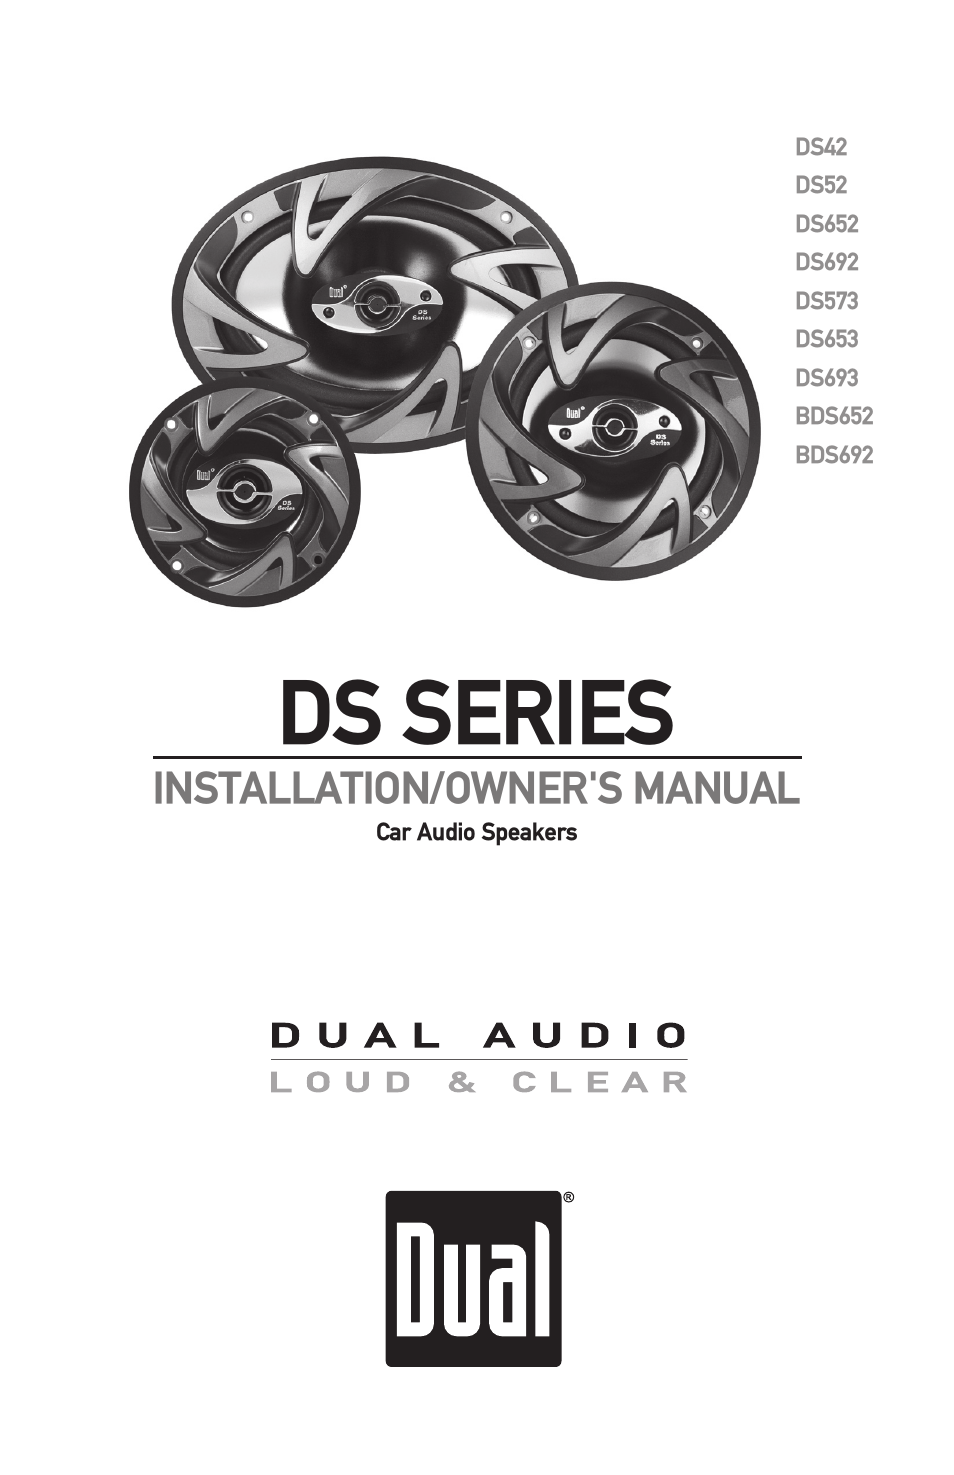 DS SERIES DS692